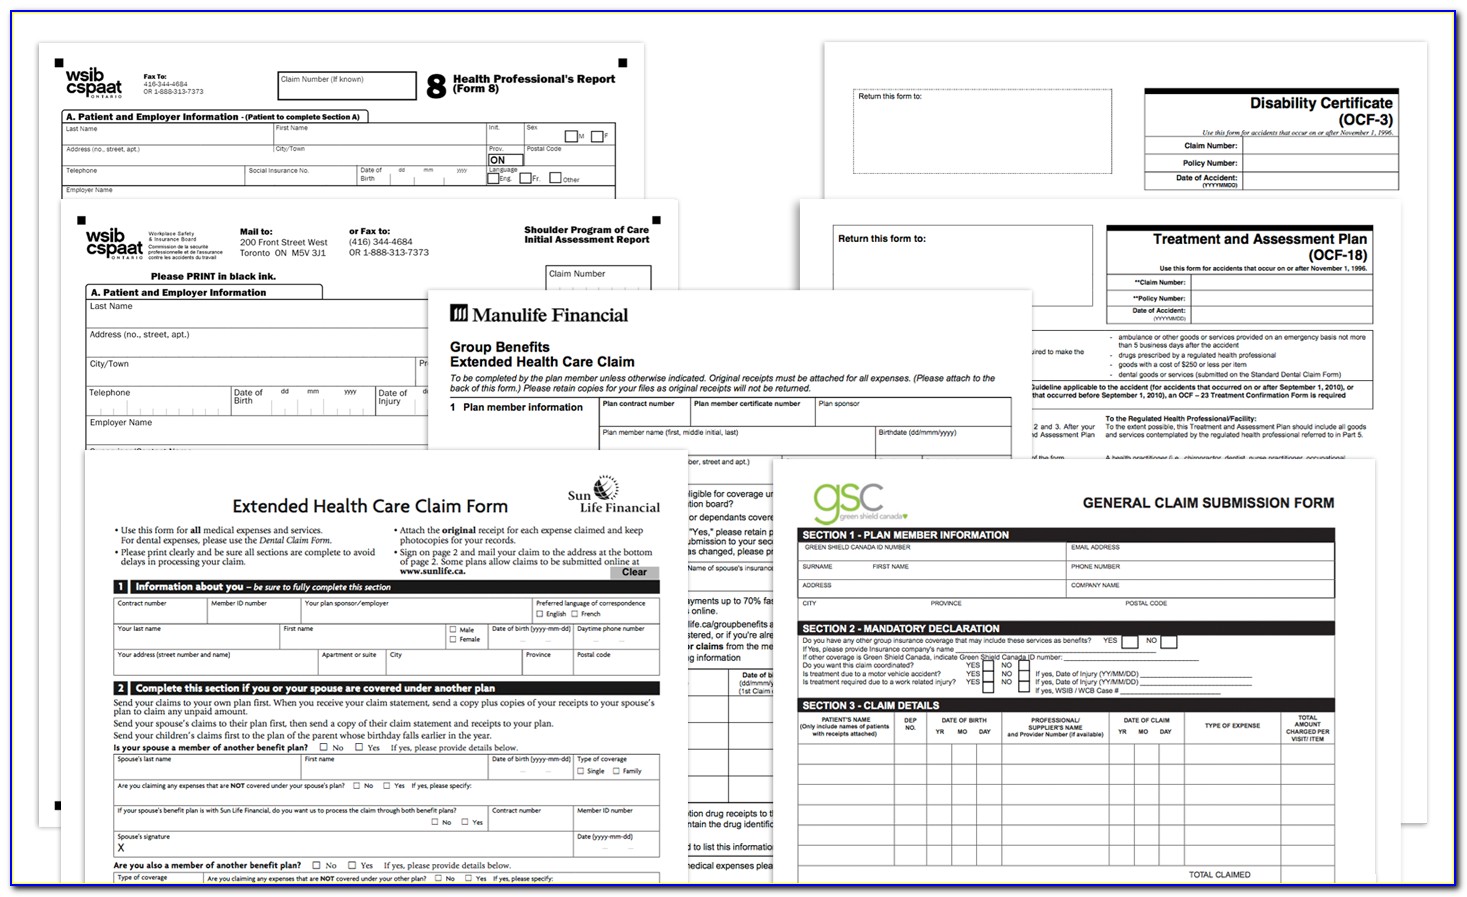 Manitoba Blue Cross Extended Health Care Claim Form